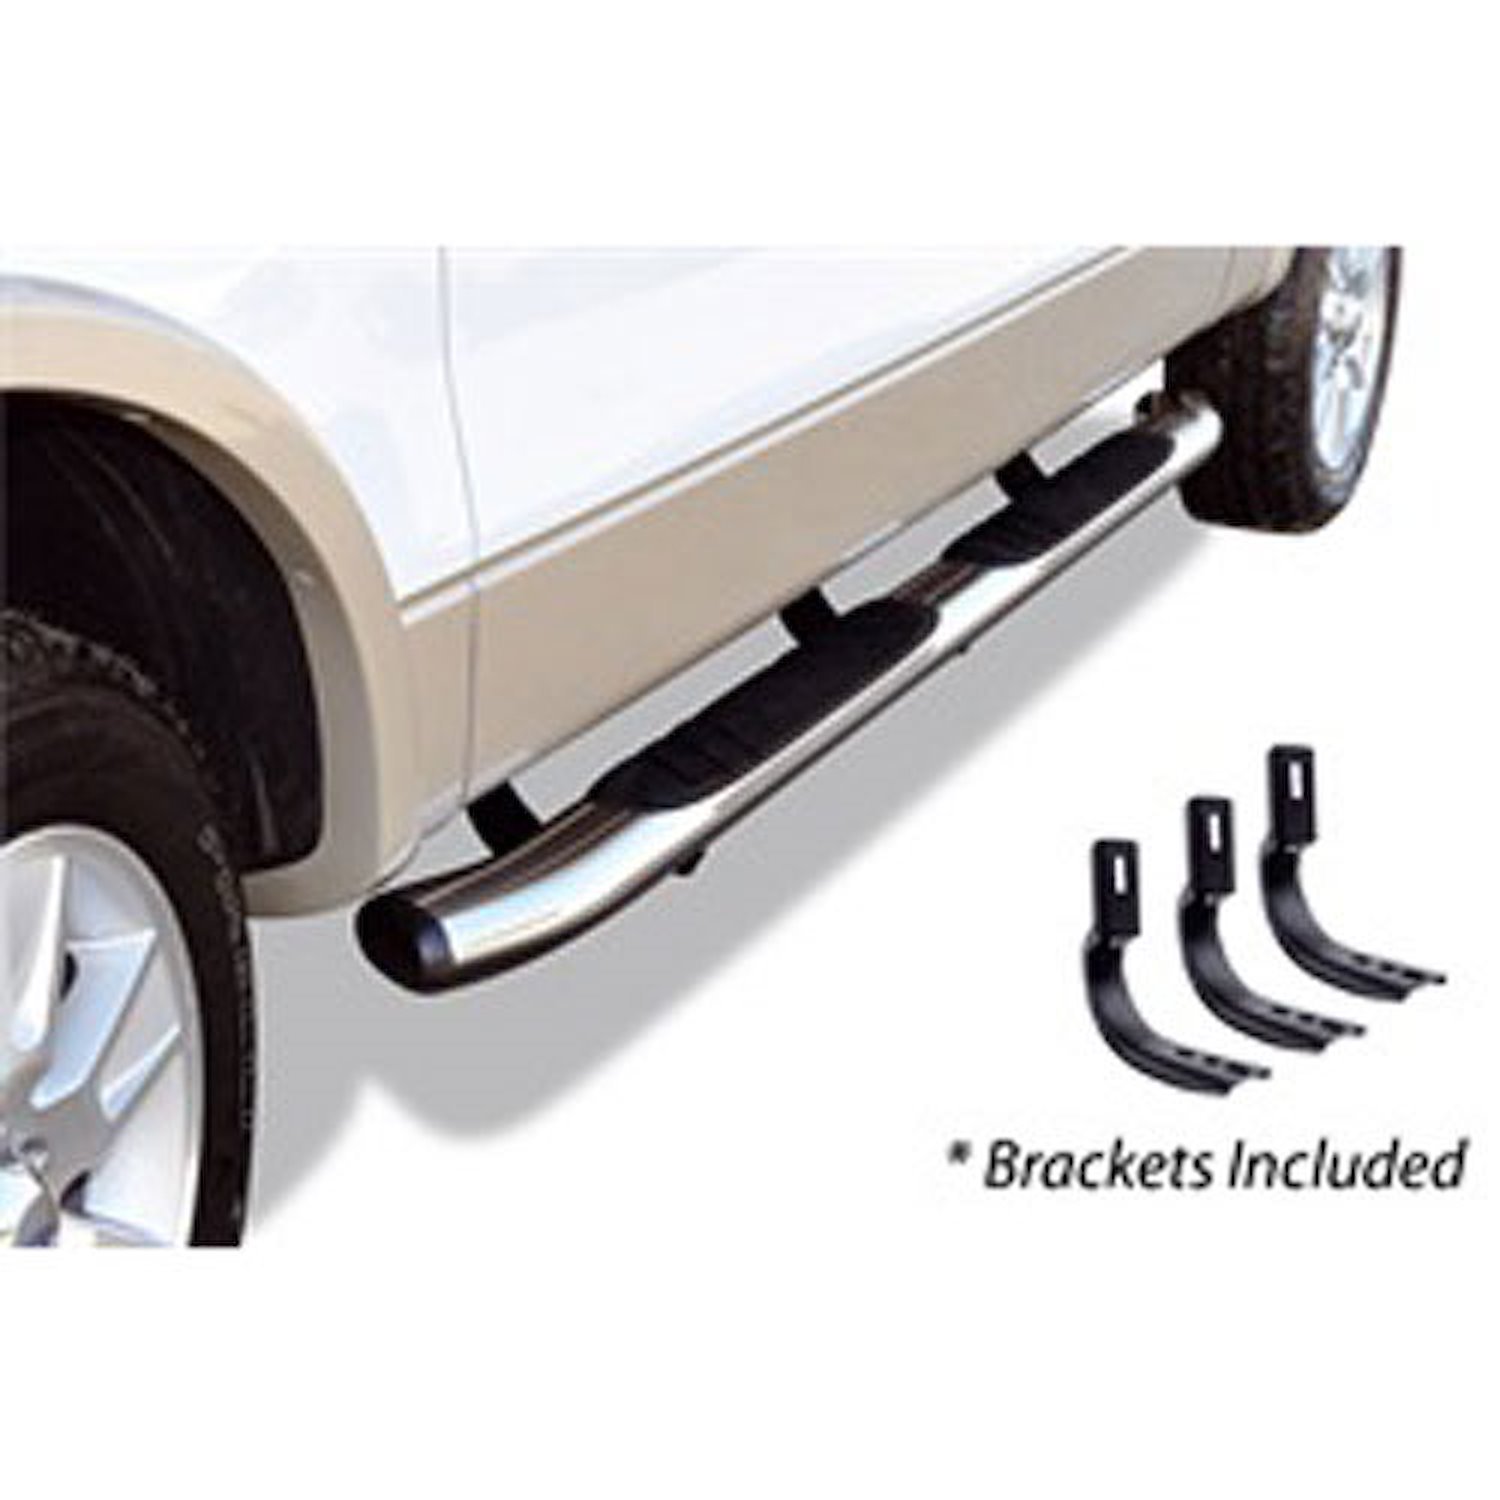 5" OE Xtreme Composite SideSteps Kit 2004-14 Ford F-150